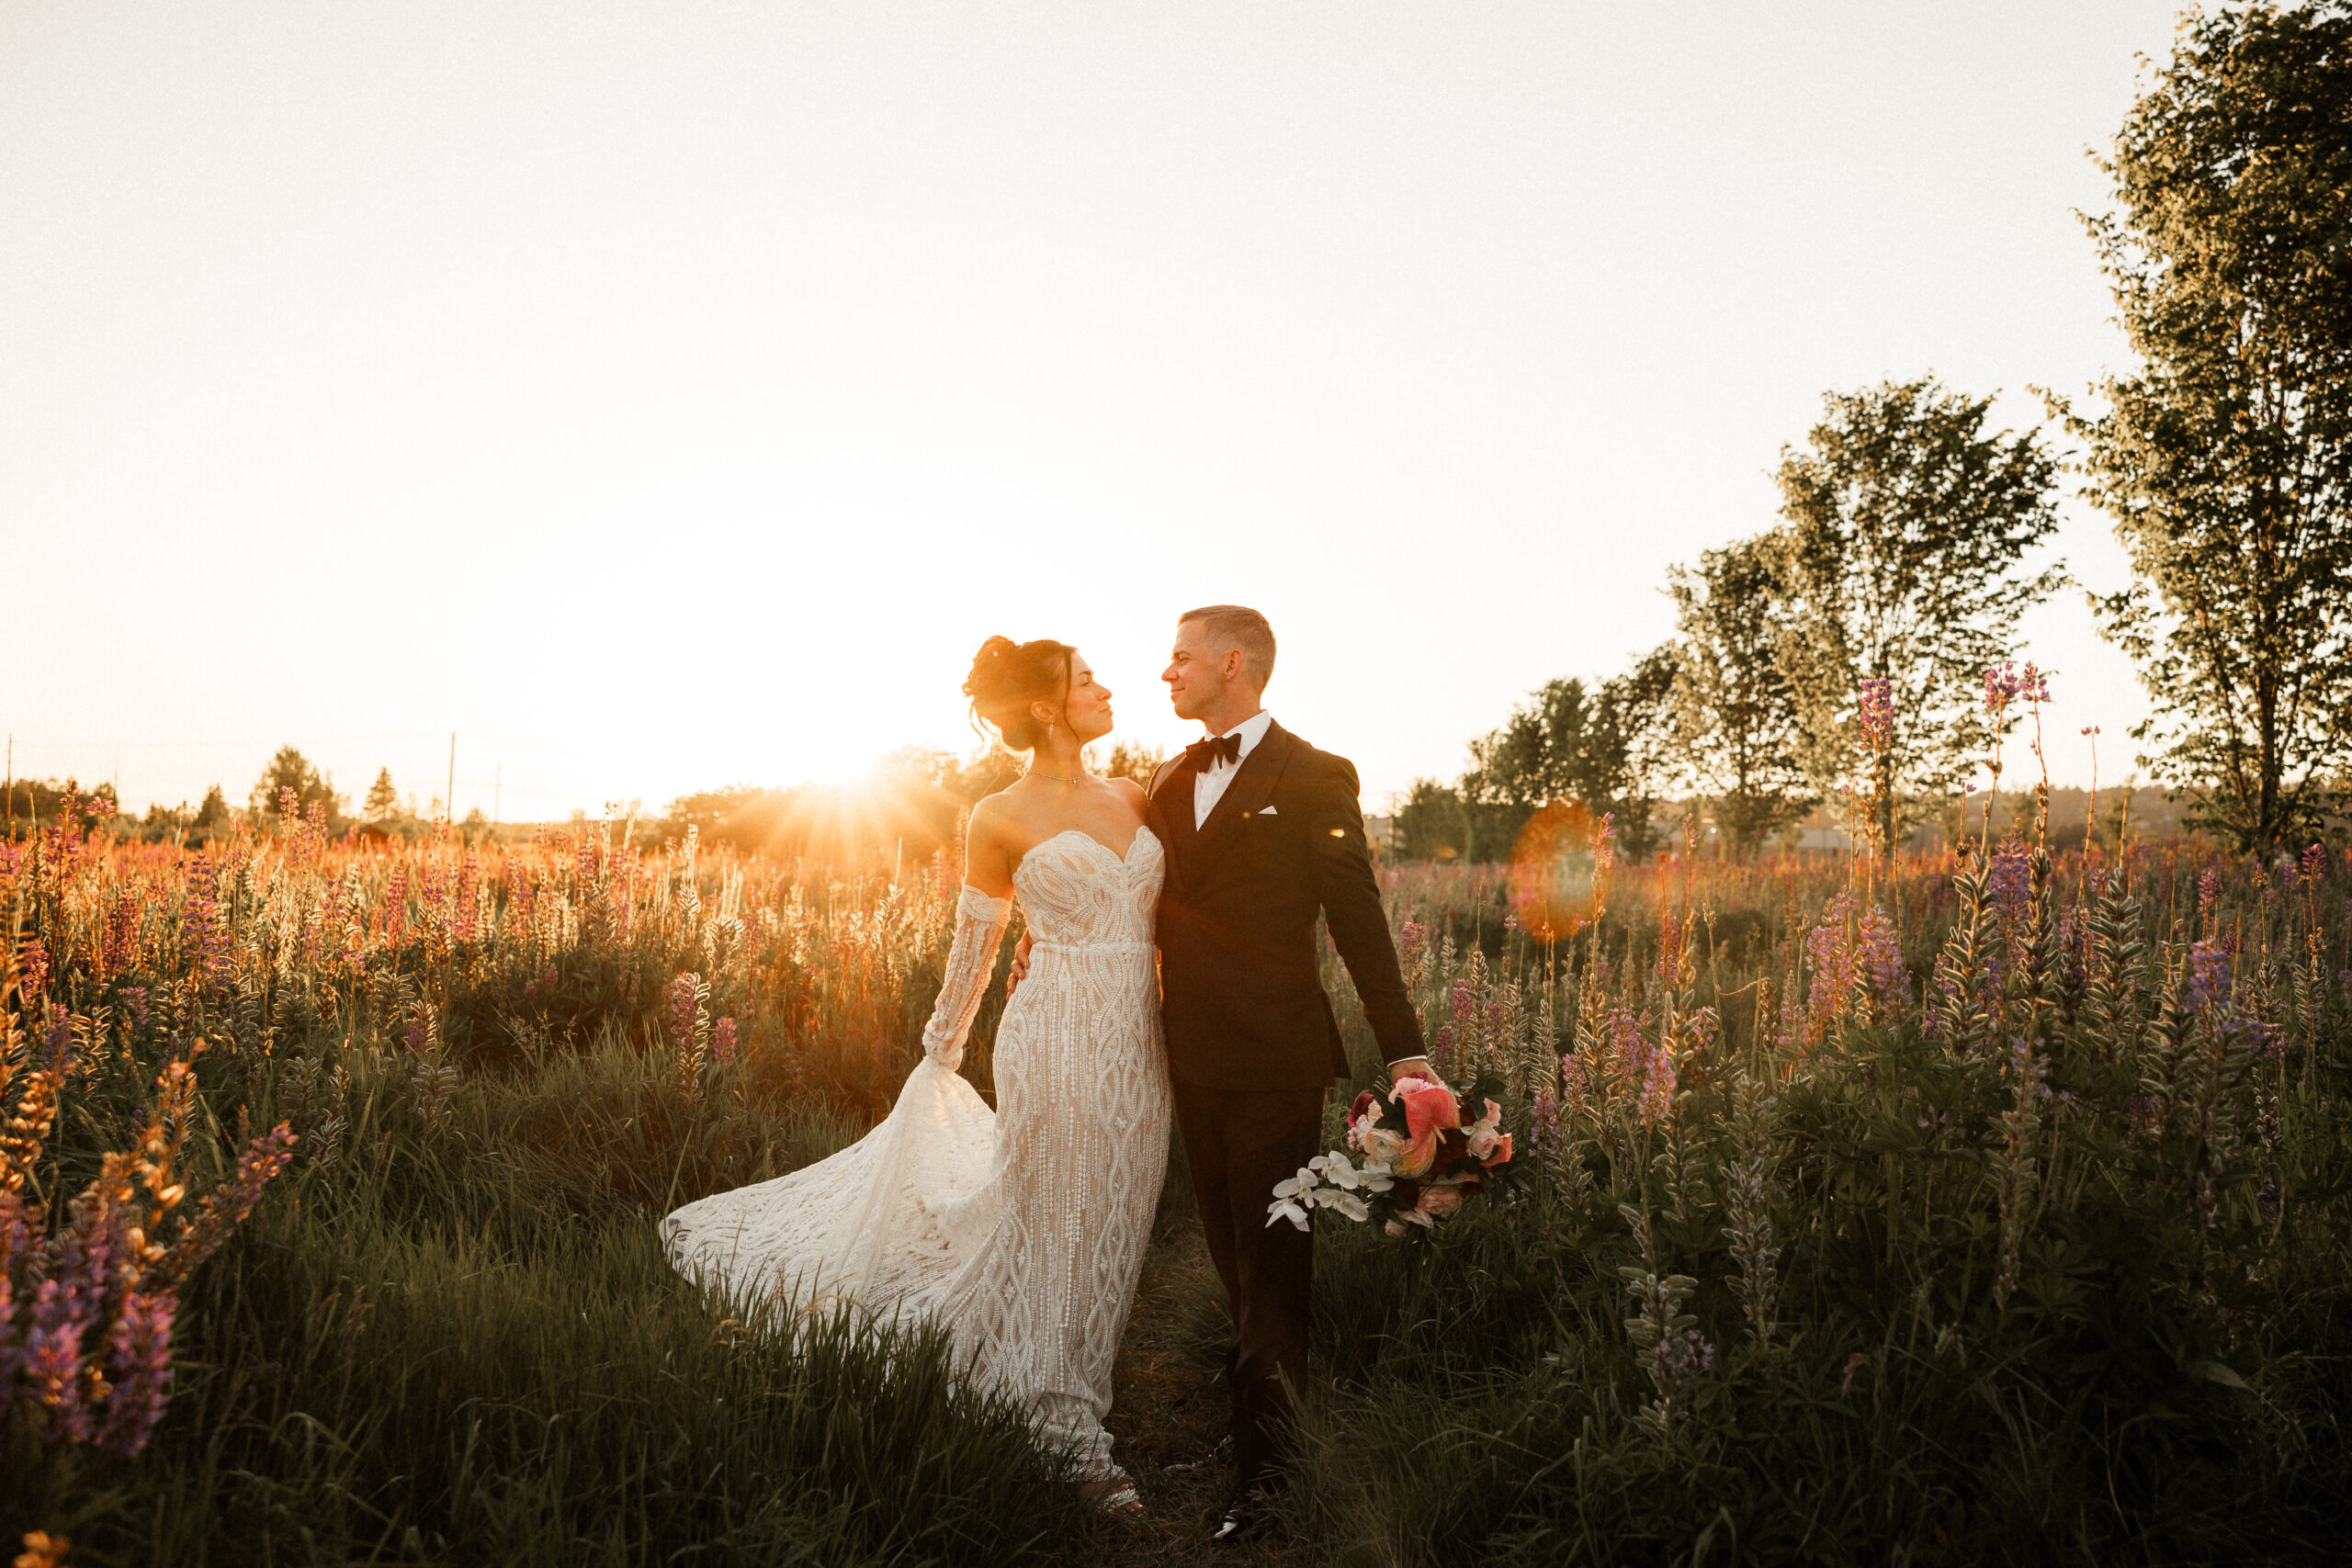 Natalie and Ben had an elegant, yet electric Farm 12 Wedding that made for the most romantic union. Check out their photos!